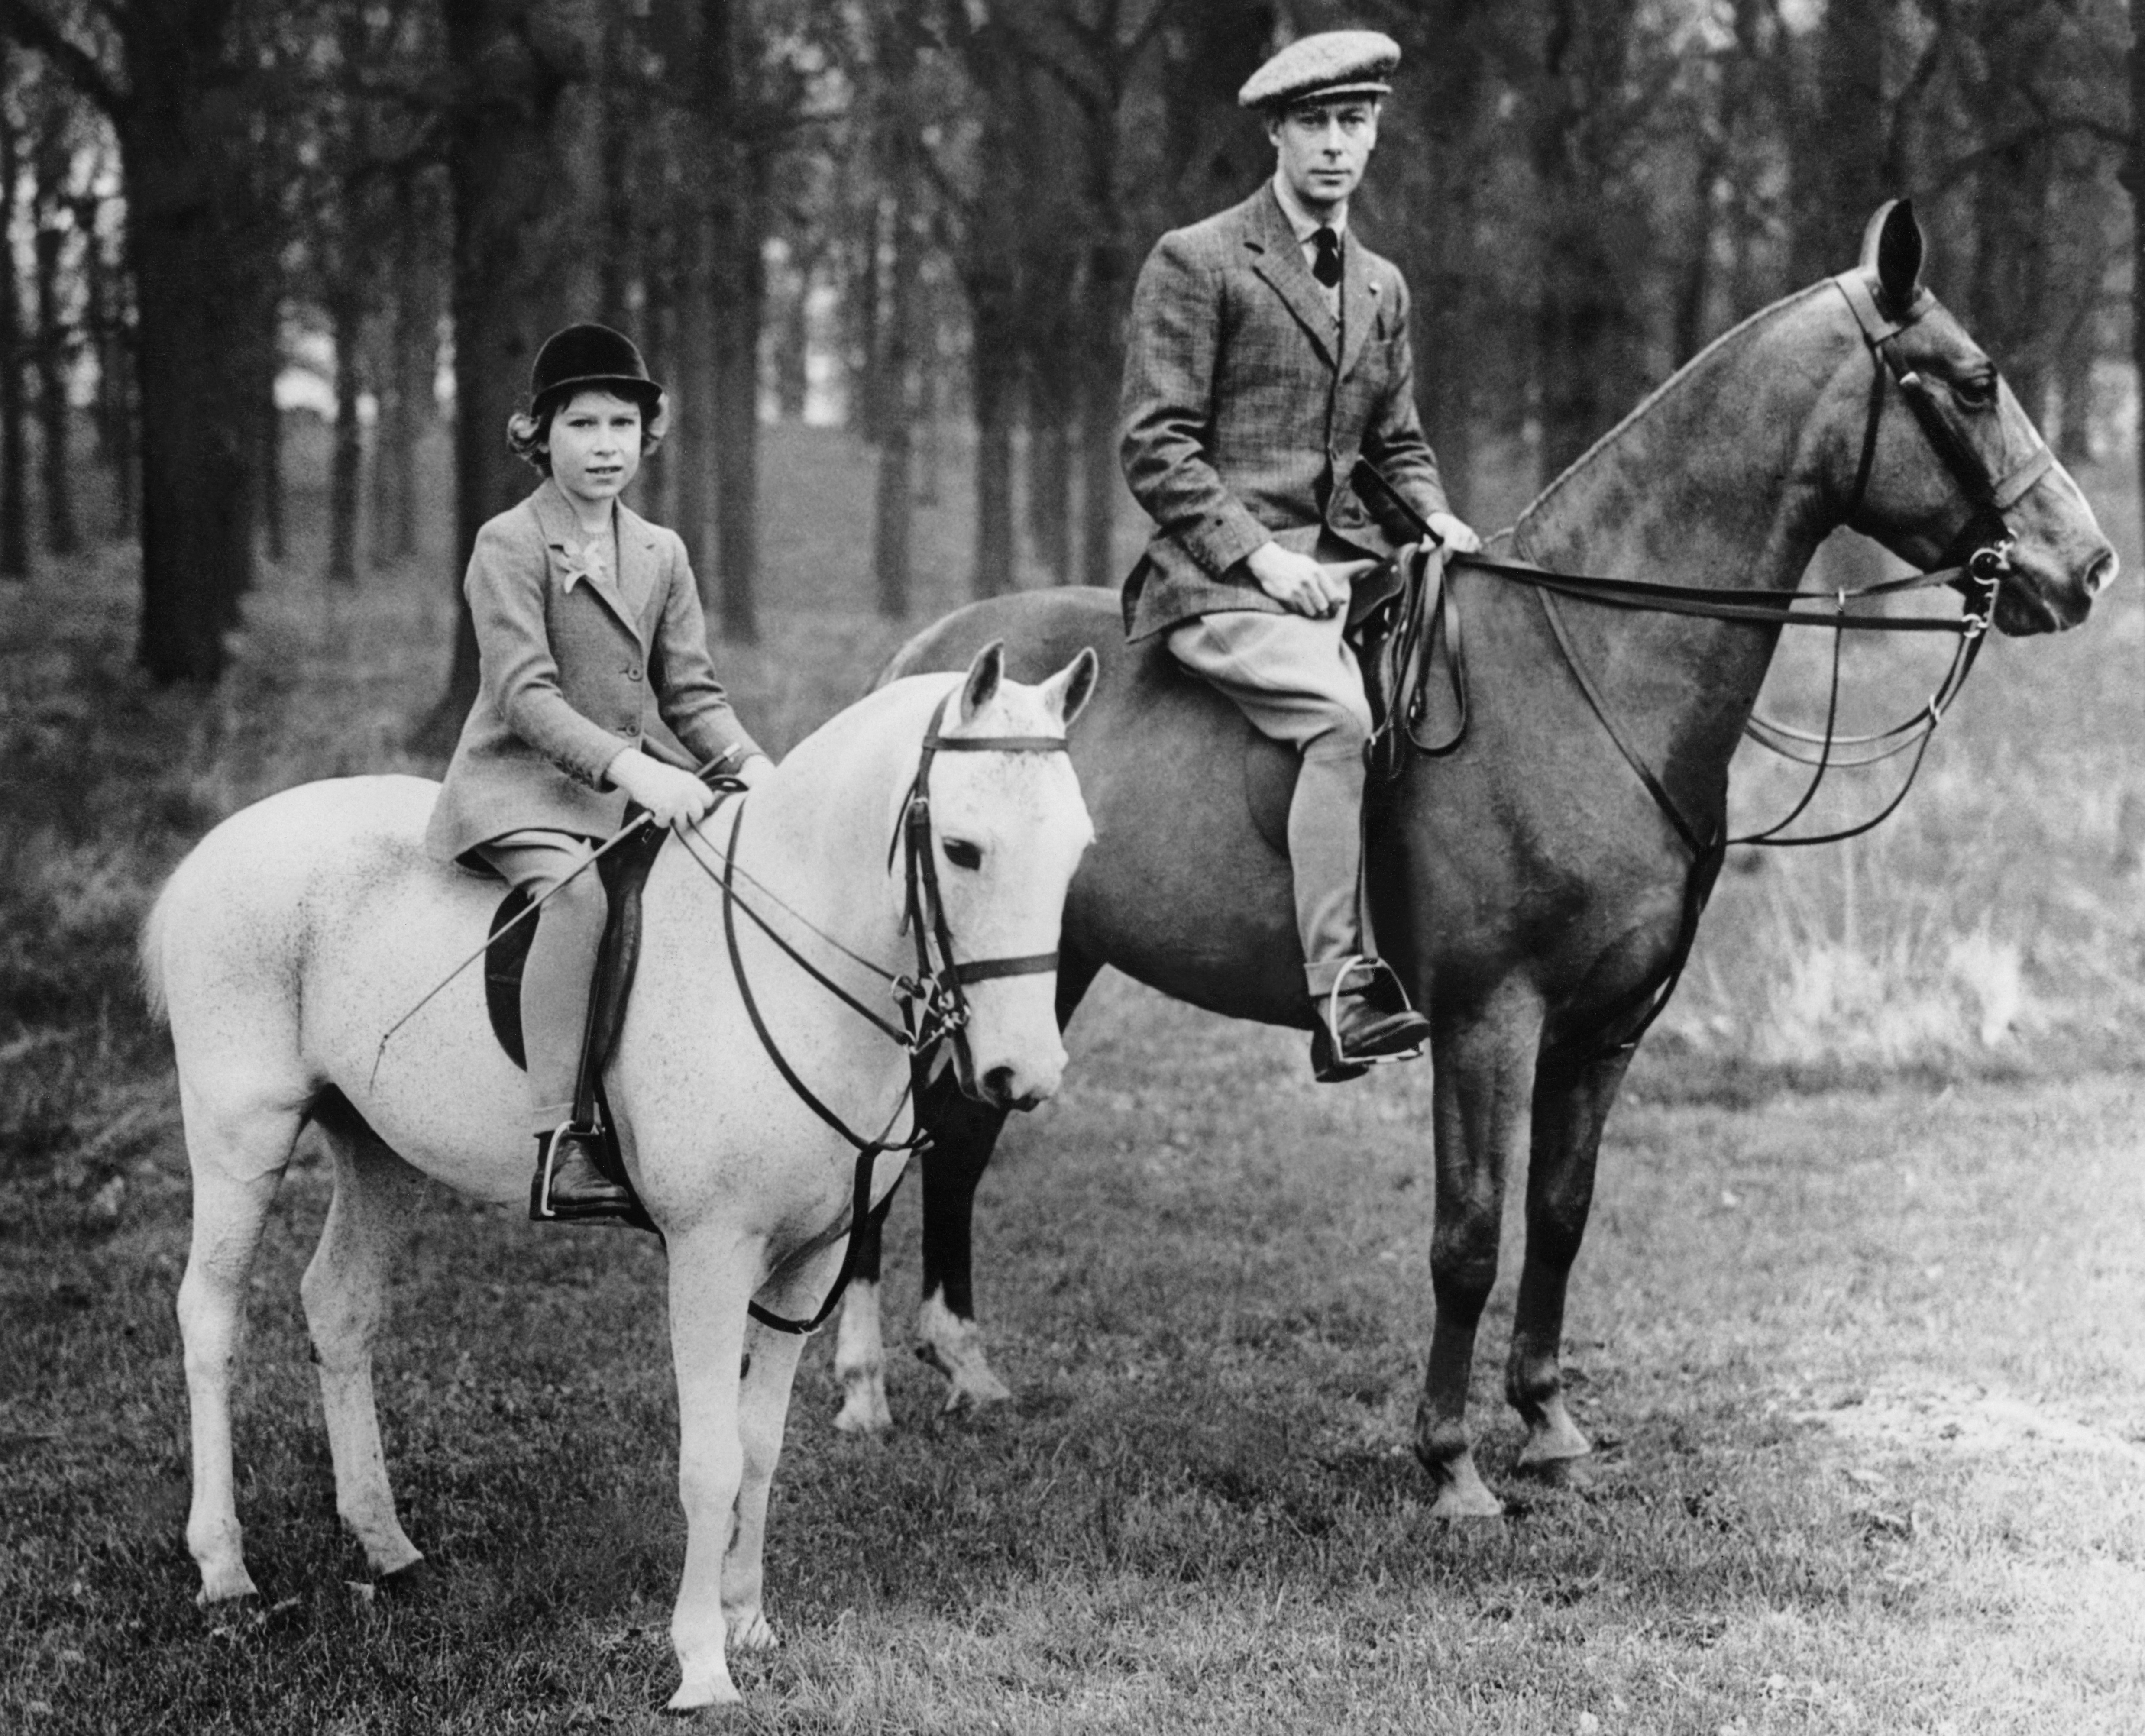 King George VI, Queen Elizabeth, and their two daughters